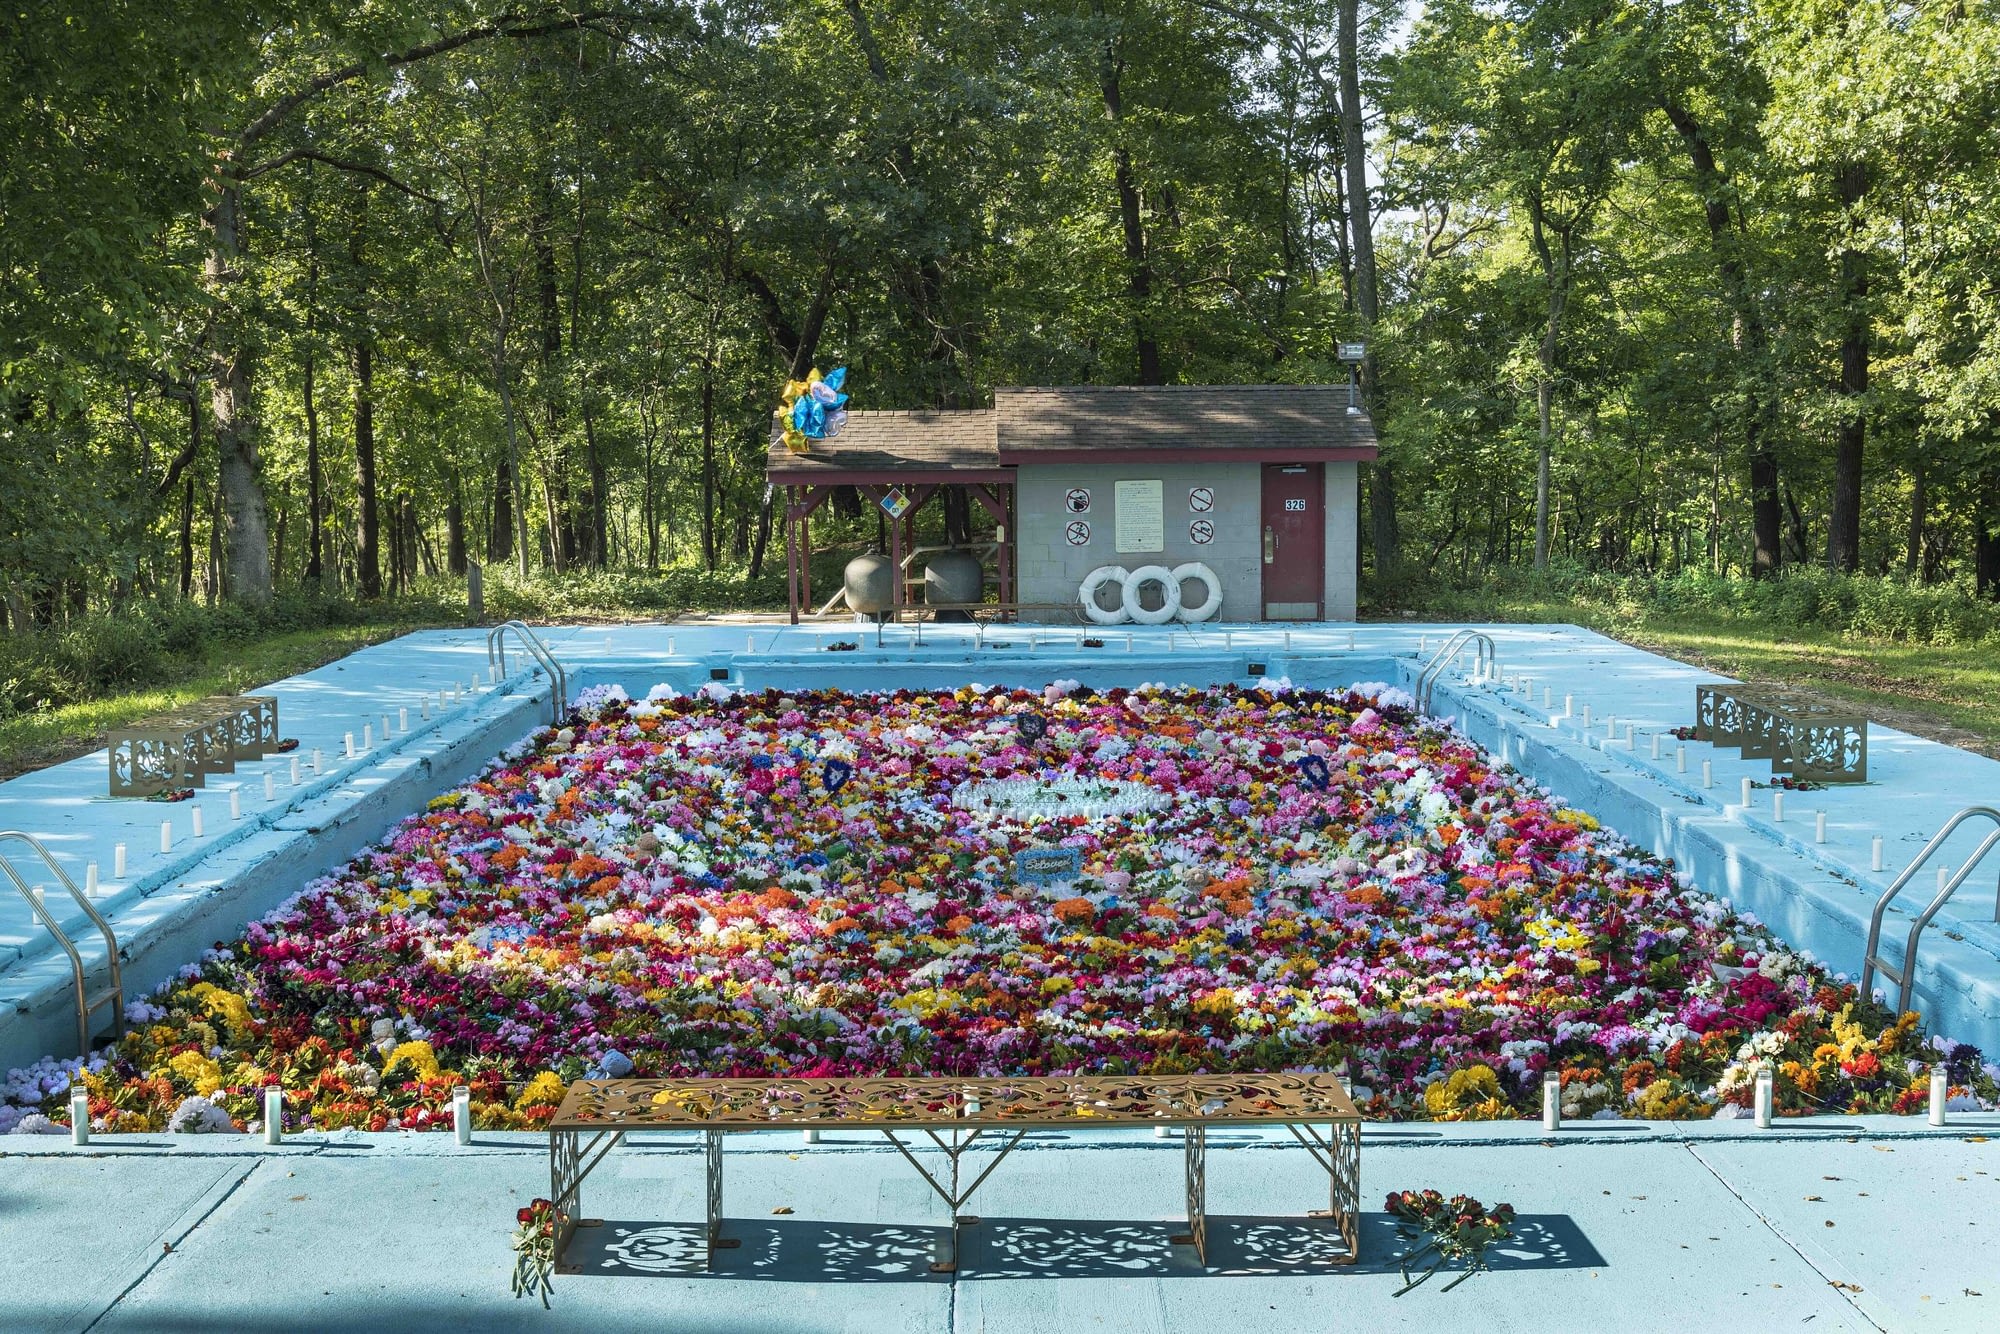 A blue swimming pool is filled with colorful flowers. Trees stand in the background and a small gray structure. There are candles and flowers in the foreground resembling an altar.